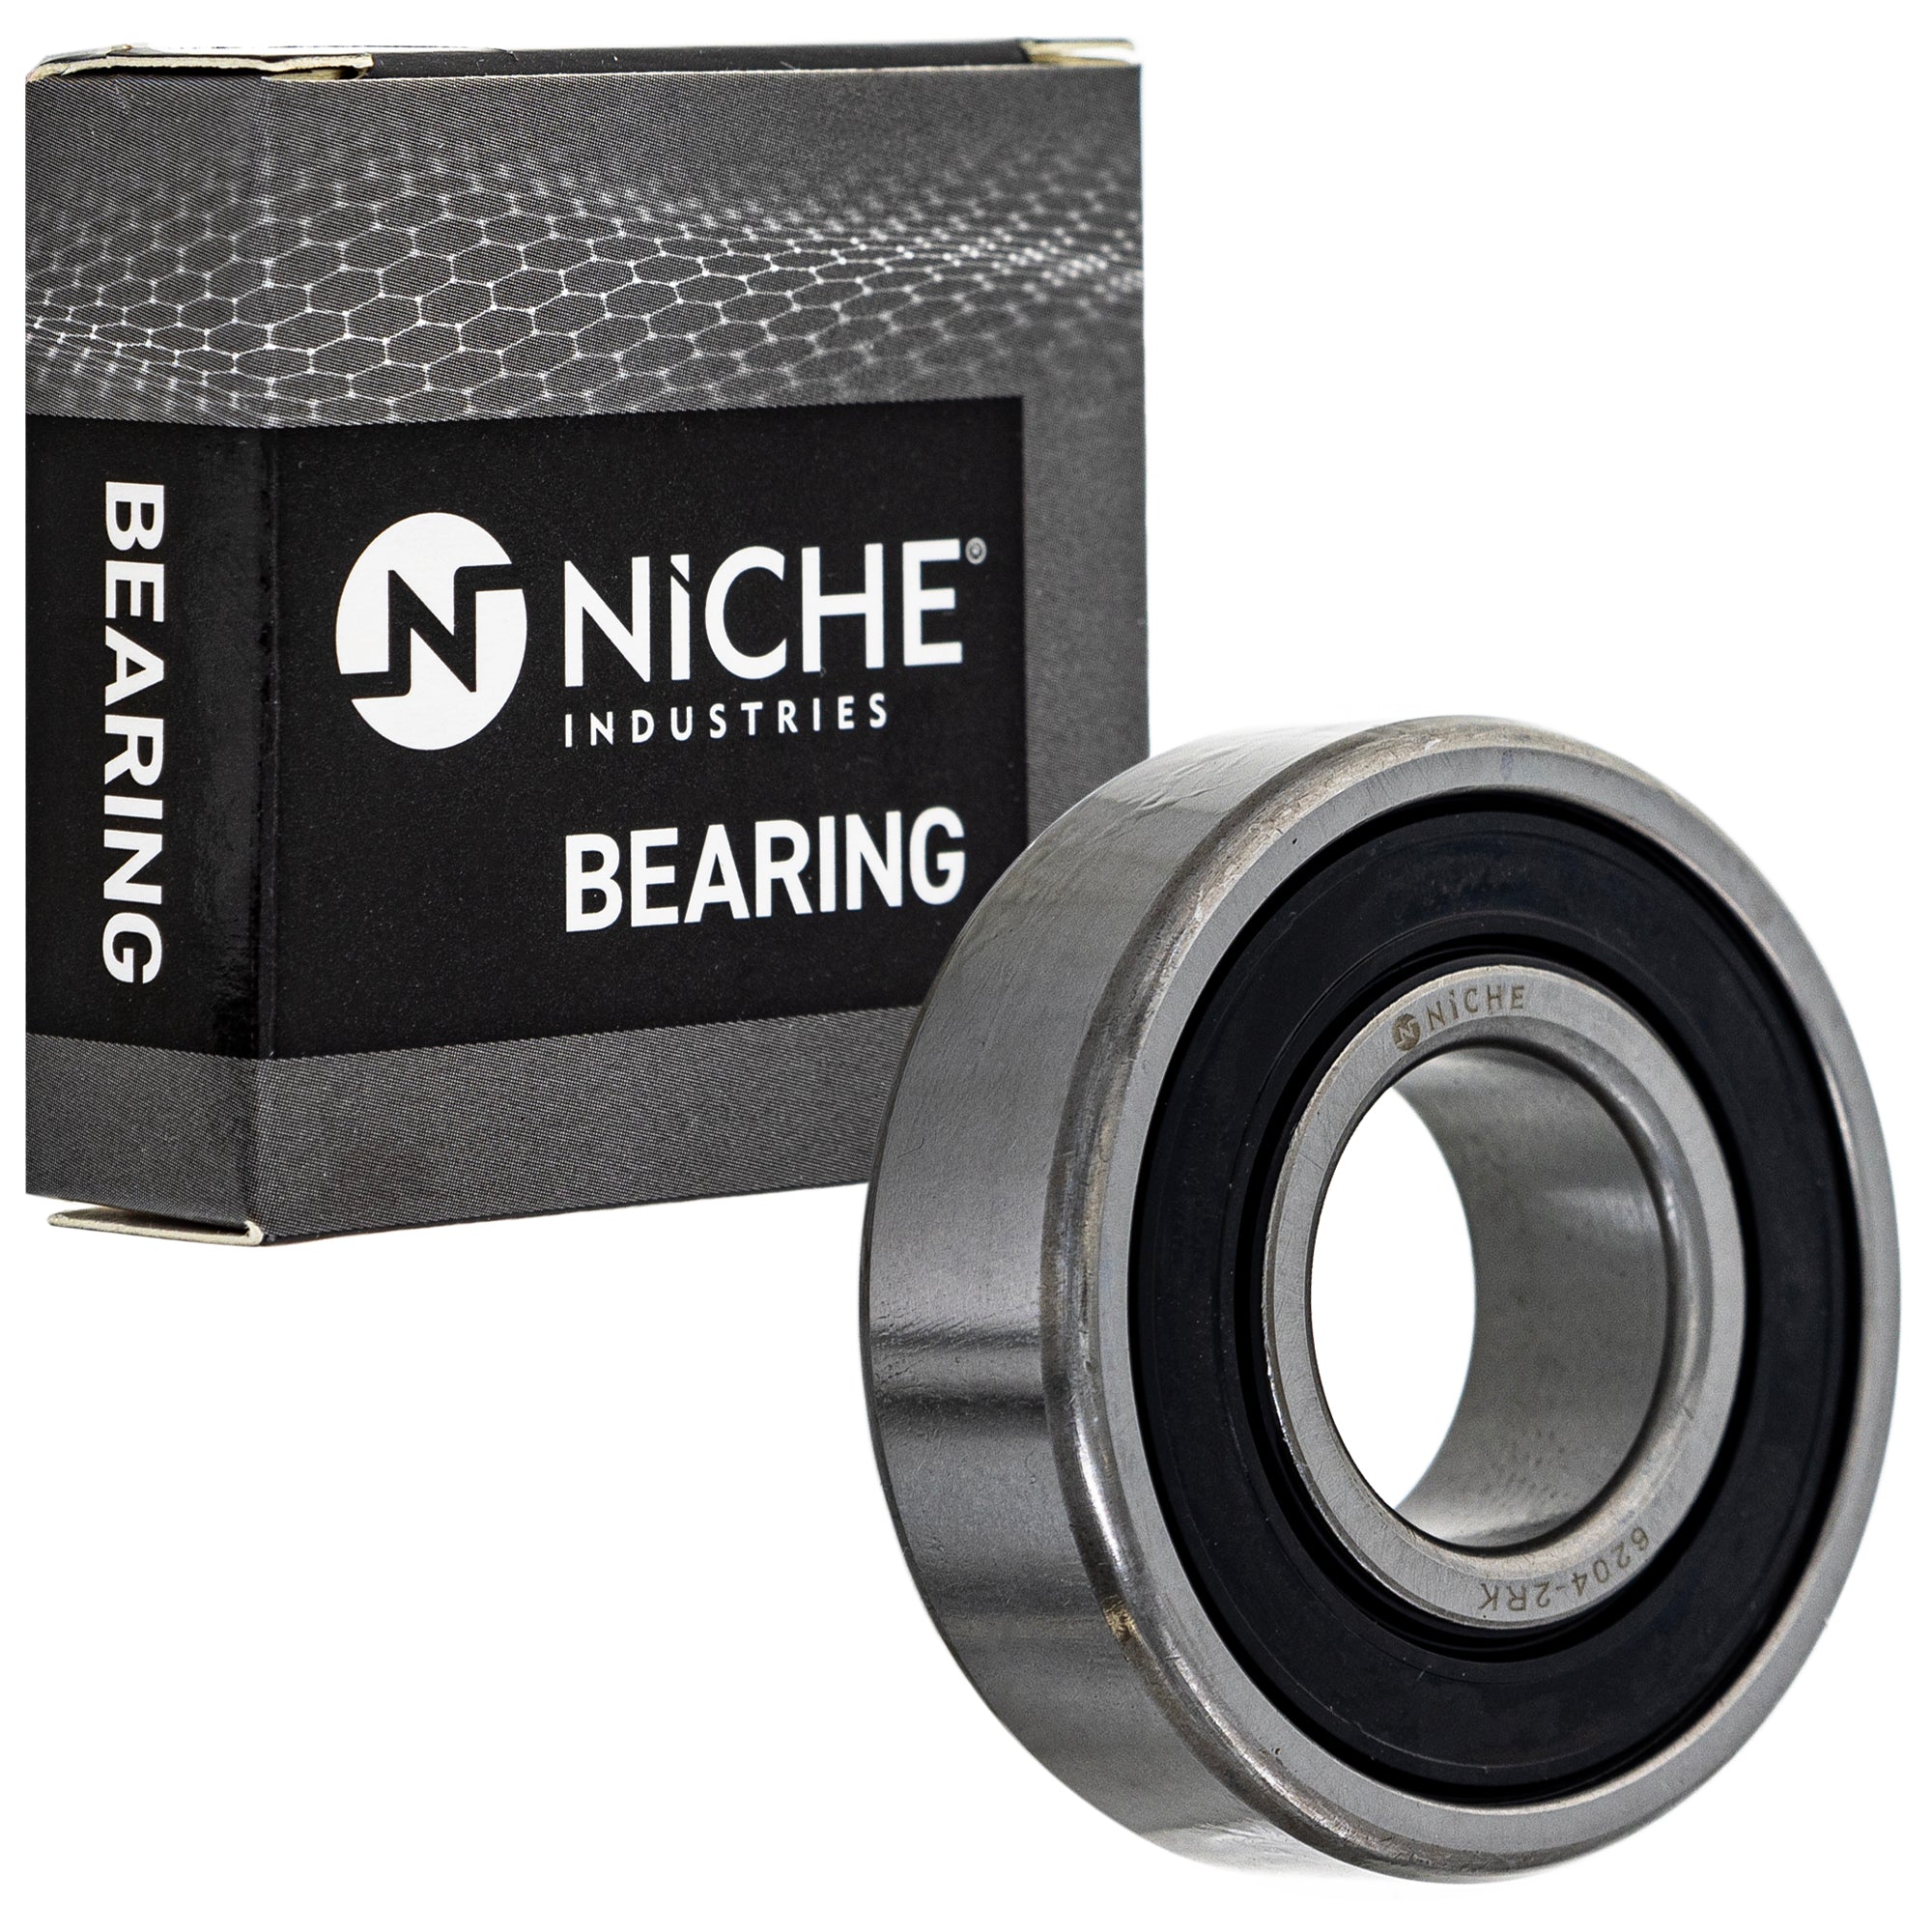 NICHE 519-CBB2281R Bearing 10-Pack for zOTHER SV650S SV650 SFV650